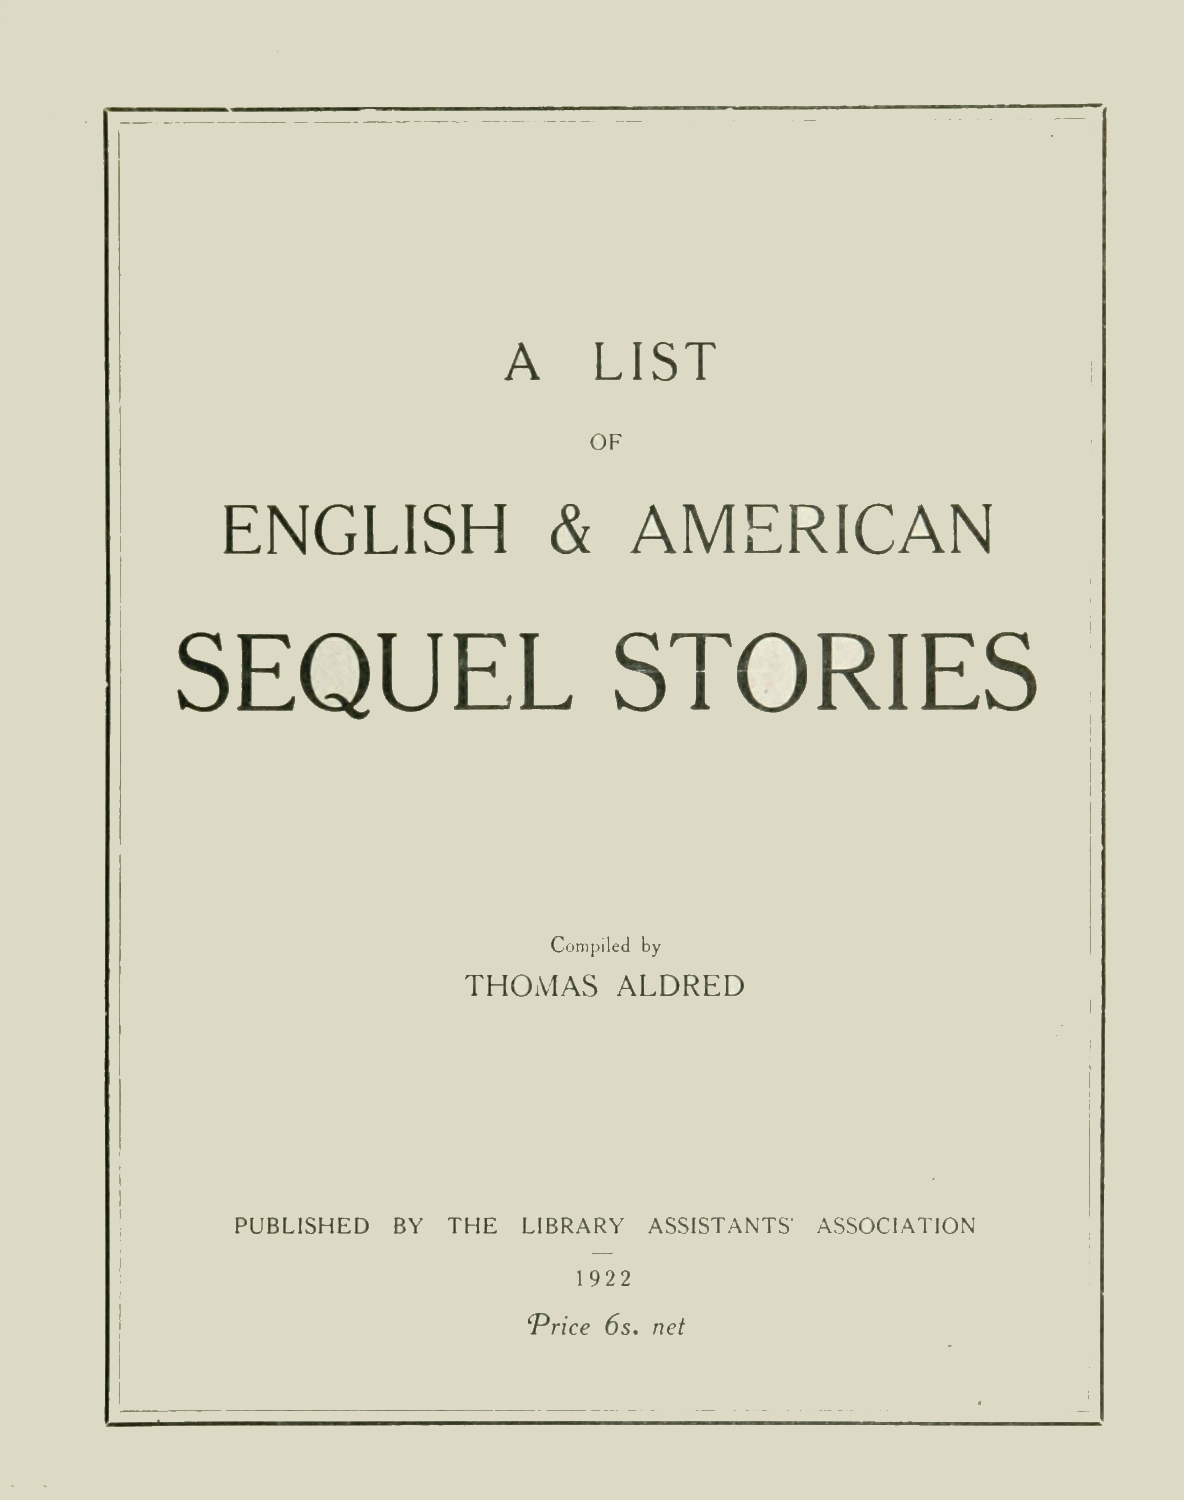 The Project Gutenberg eBook of A List of English & American sequel